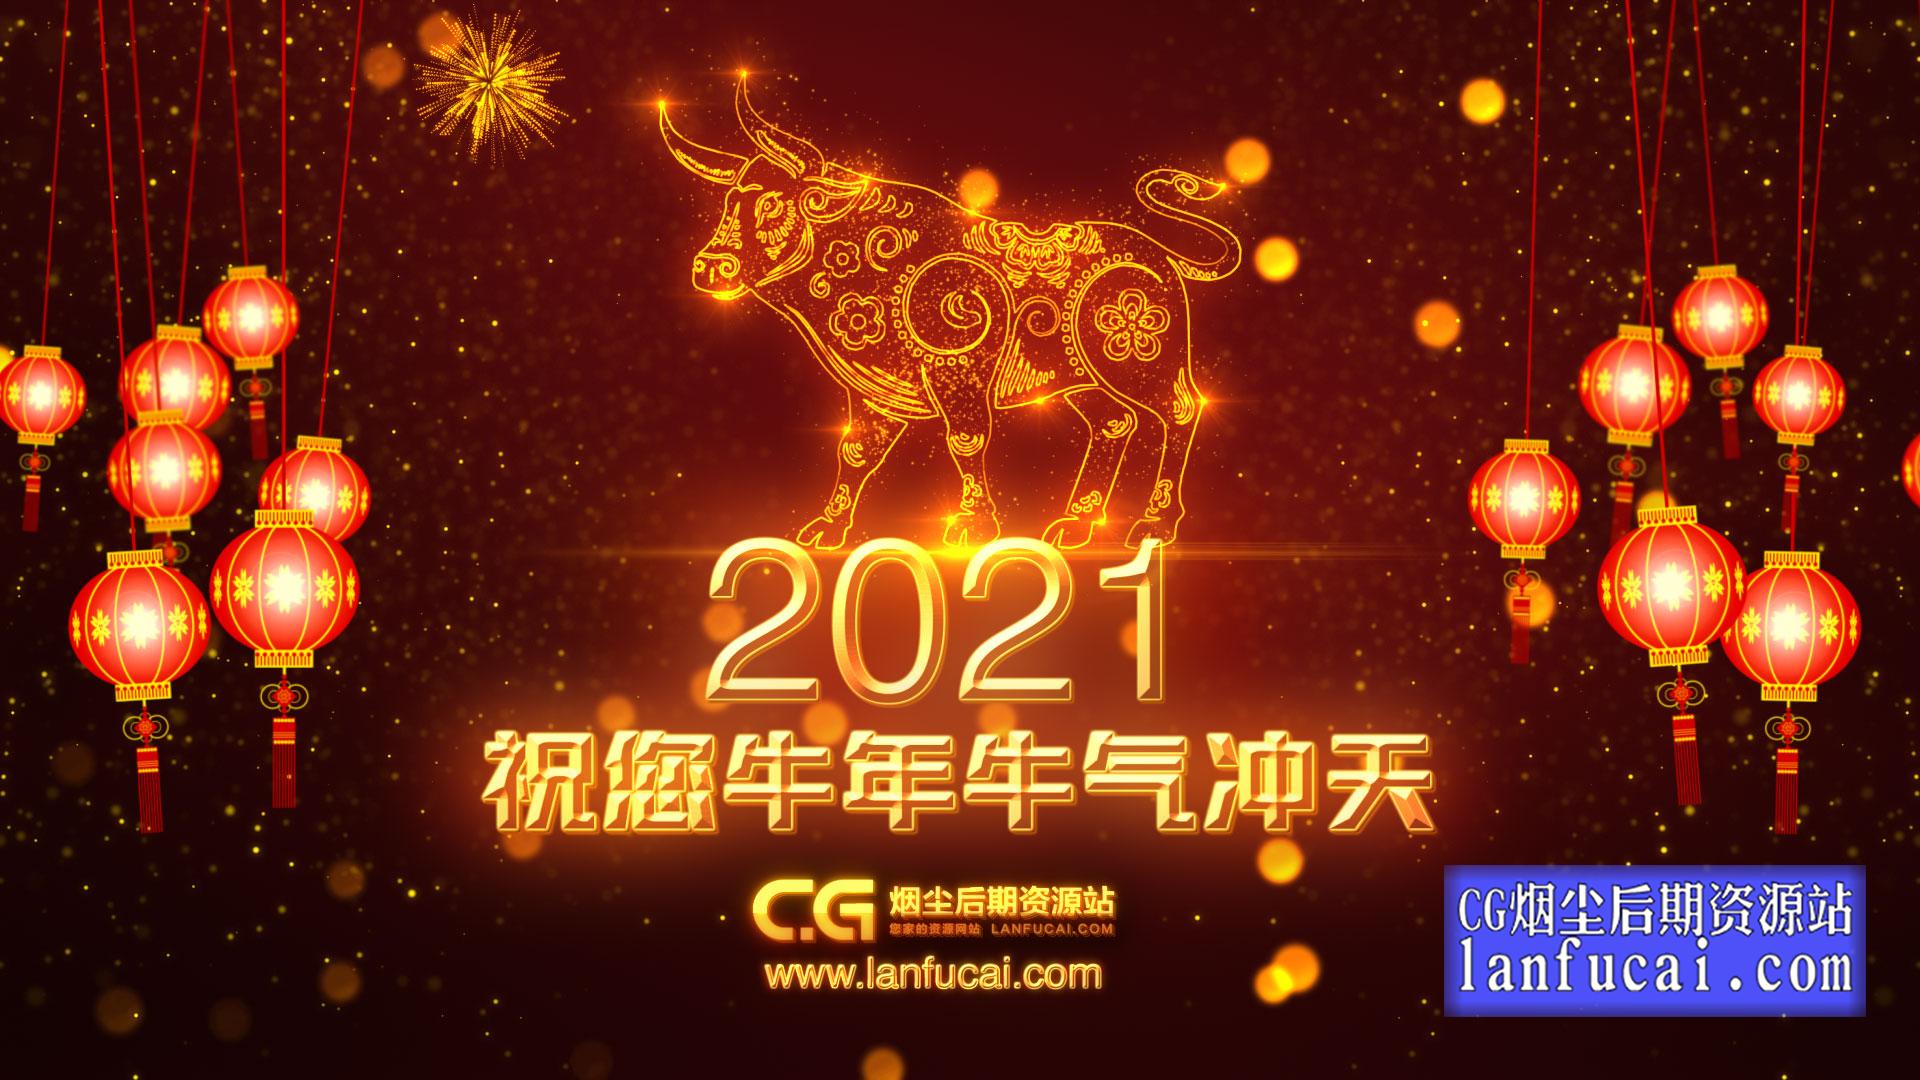 Chinese New Year Greetings 2021 -00453-